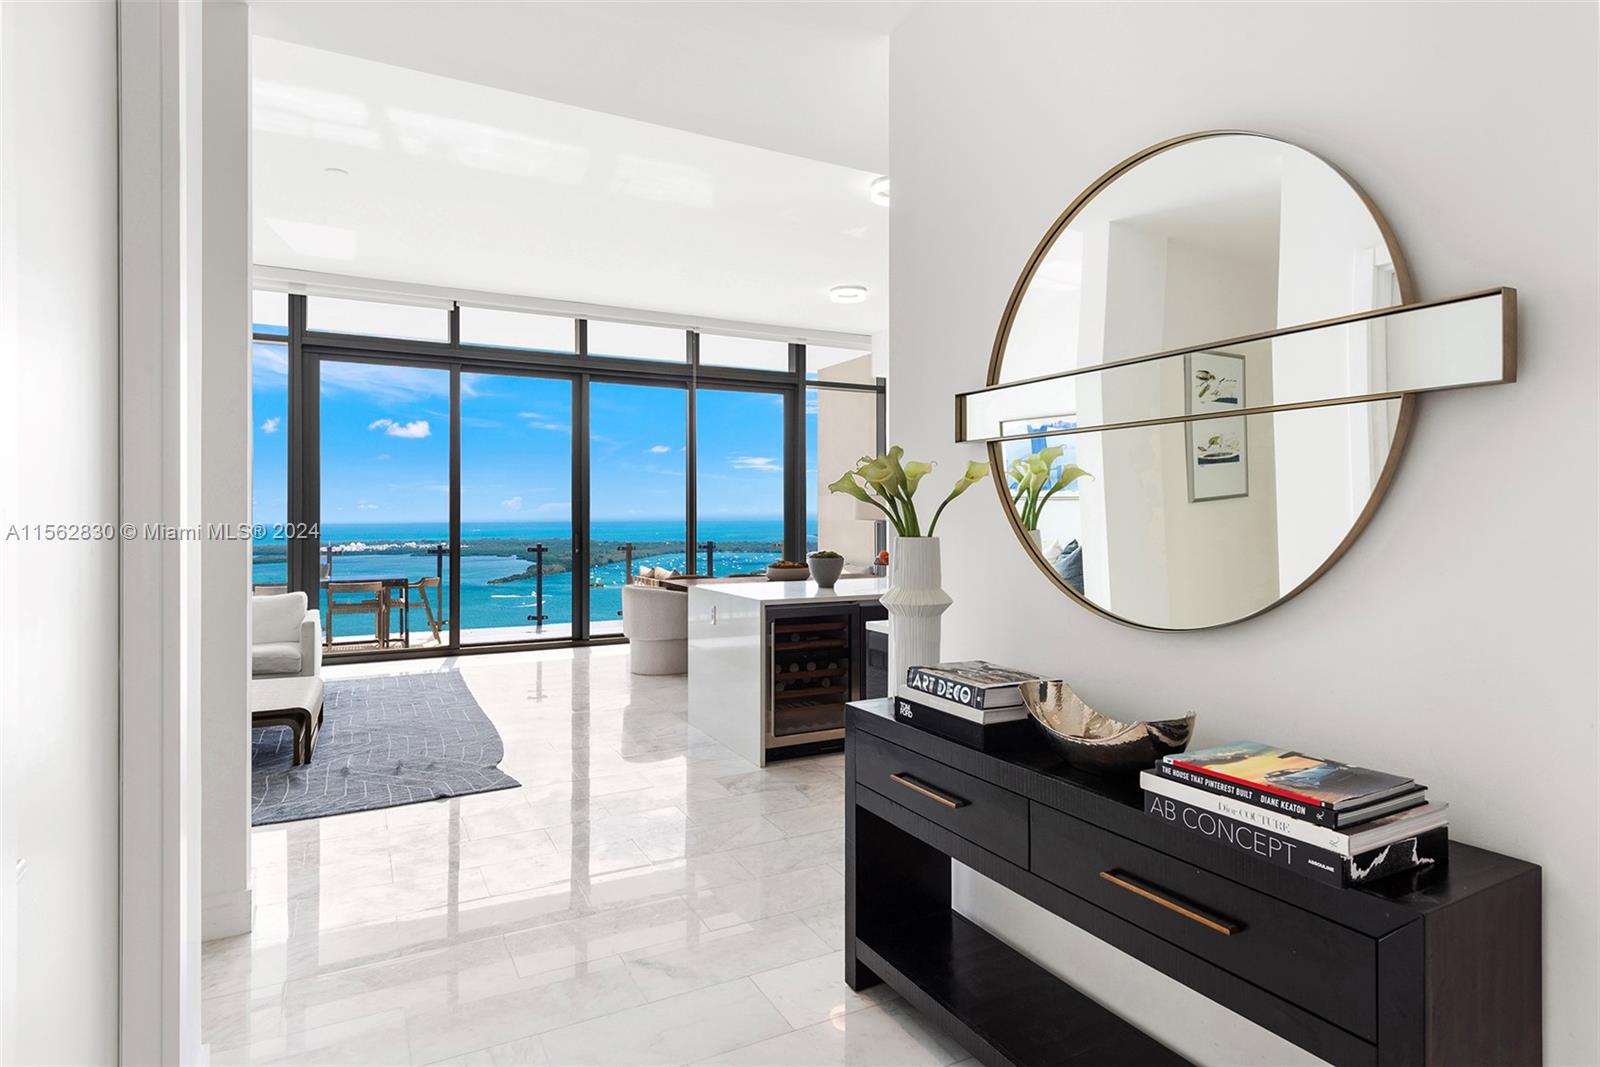 Property for Sale at 1451 Brickell Ave Lph 5201, Miami, Broward County, Florida - Bedrooms: 3 
Bathrooms: 4  - $4,350,000